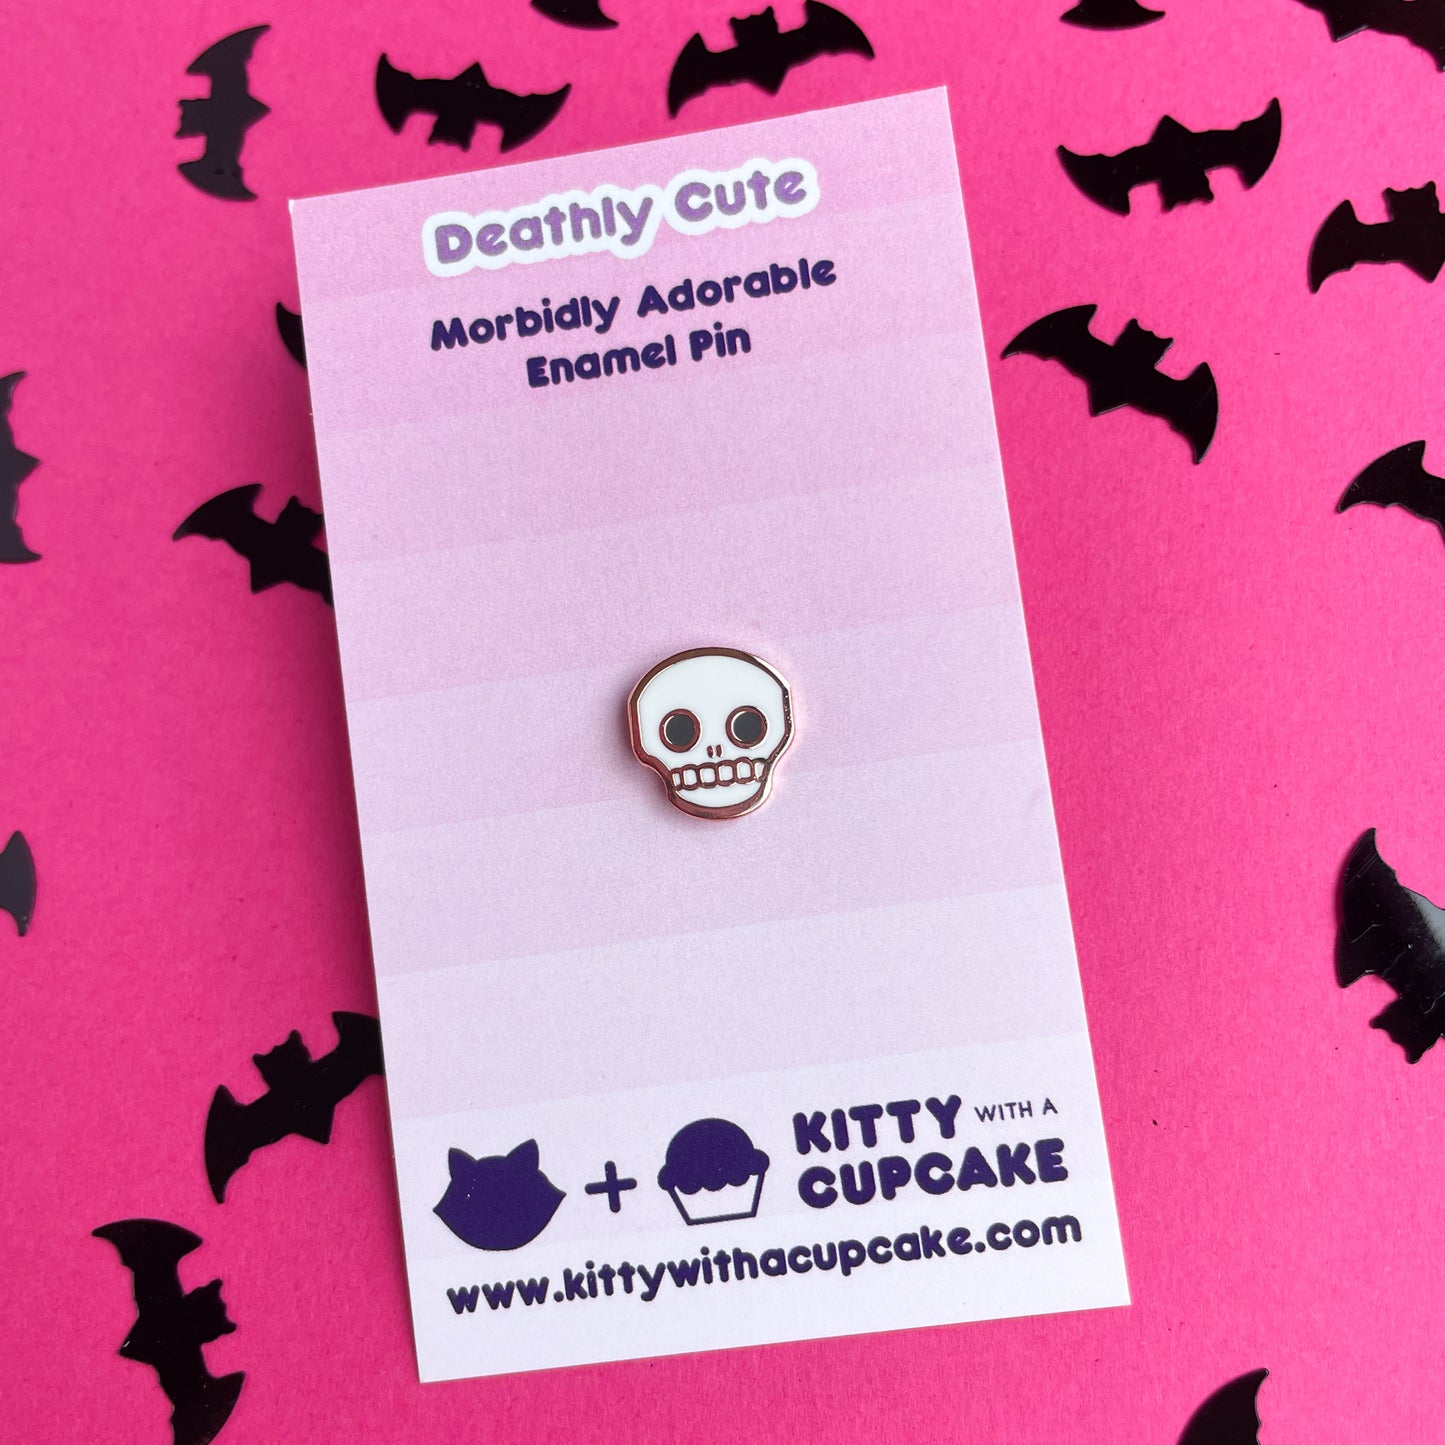 A cute skull pin on a pink card.